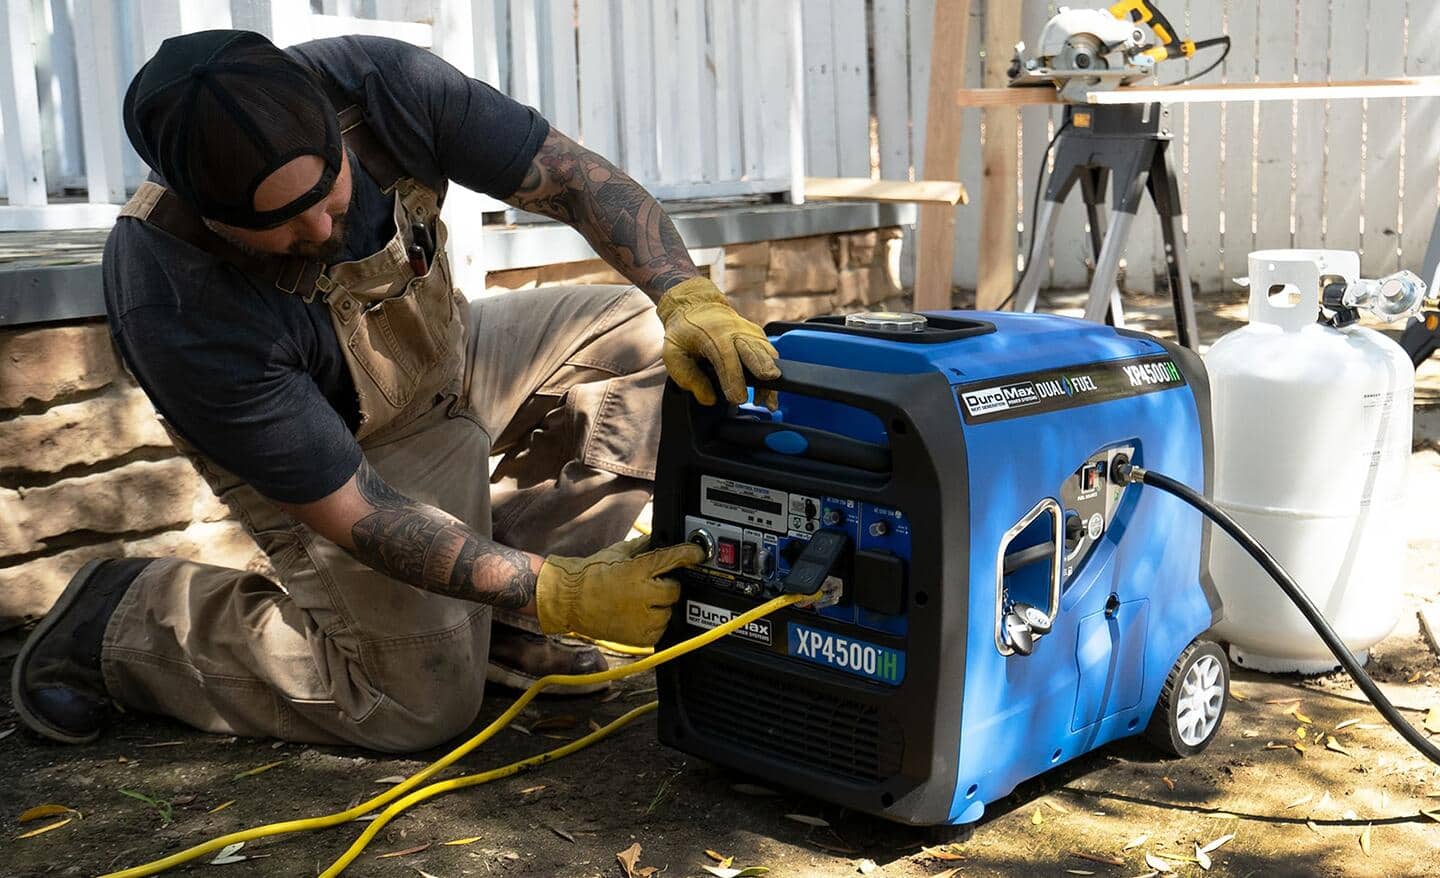 A man kneels down with both hands on a generator.